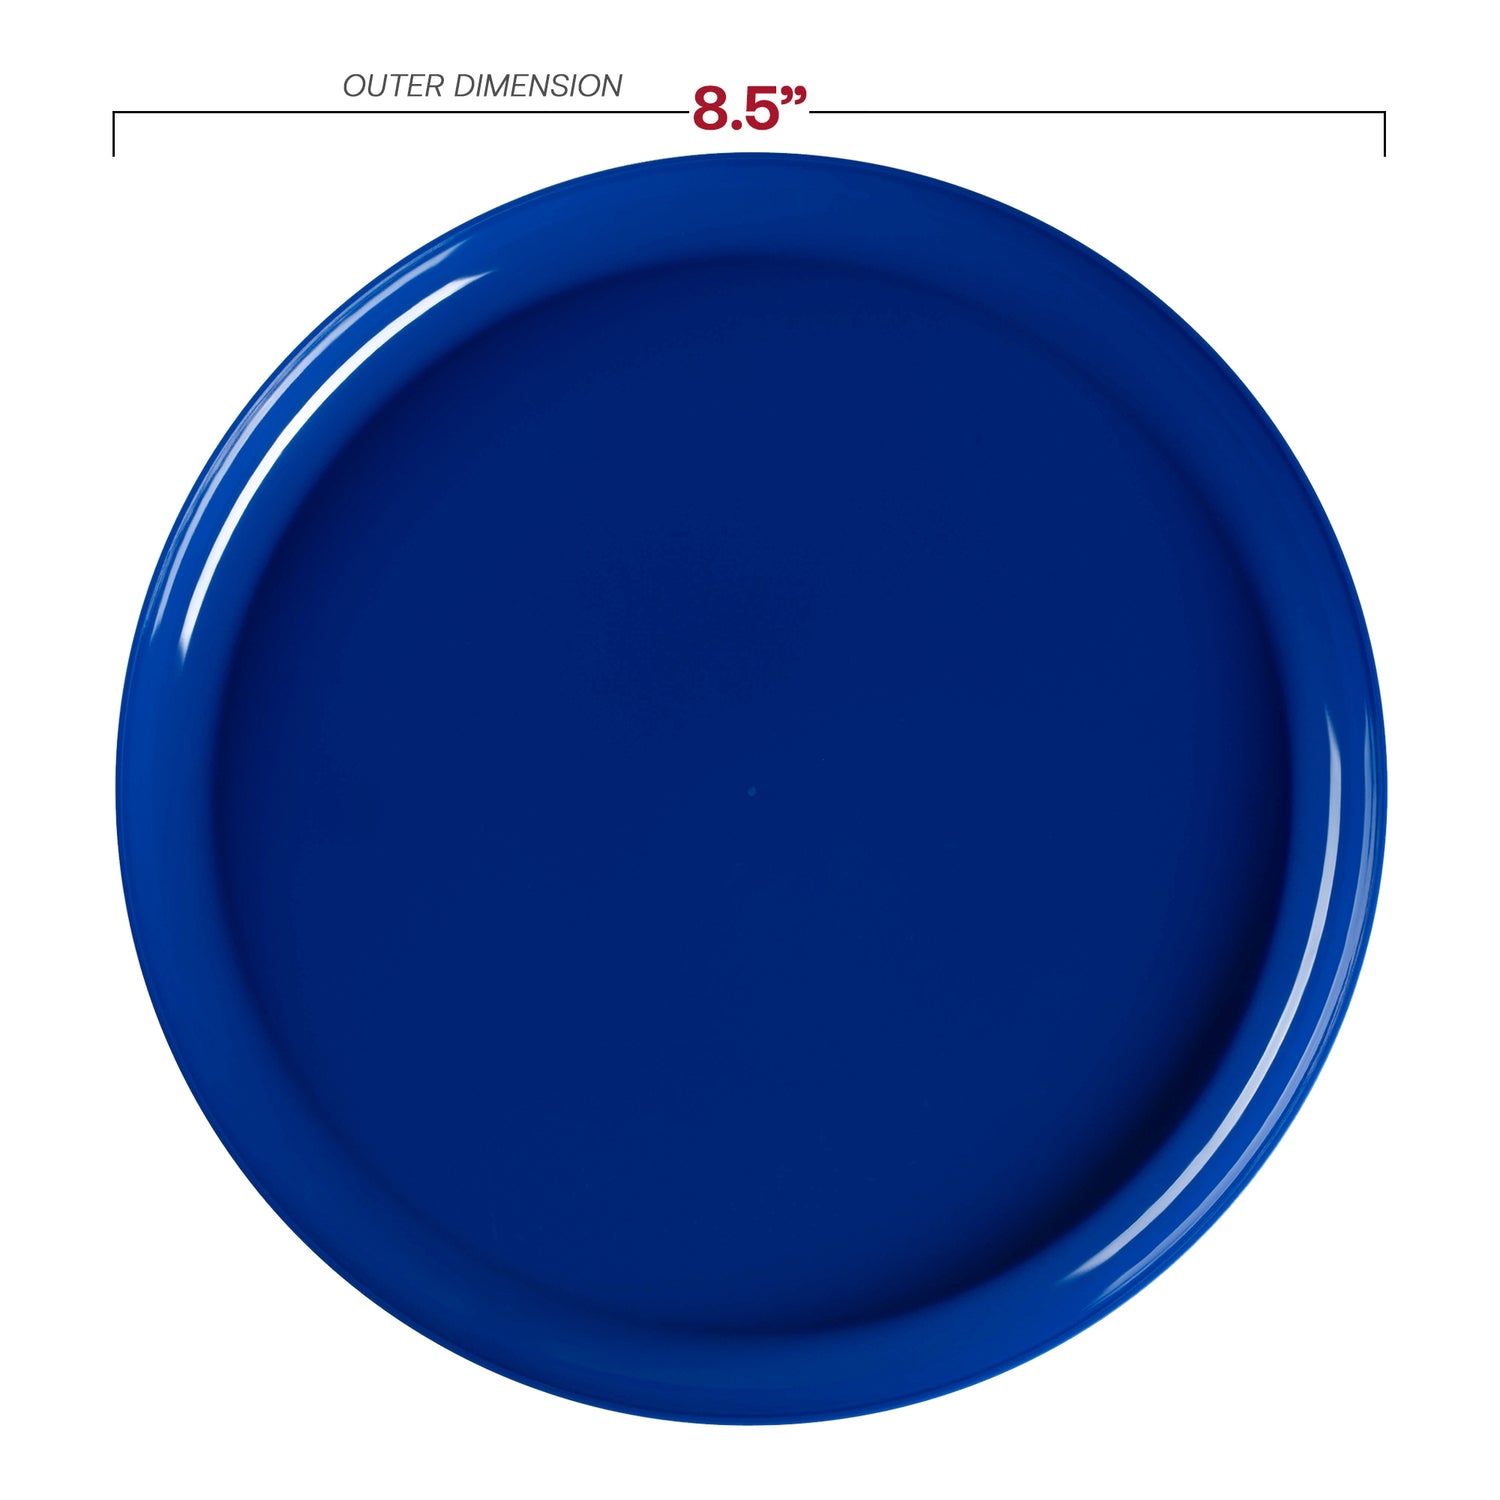 Light Blue Flat Round Disposable Plastic Appetizer/Salad Plates (8.5") Dimension | The Kaya Collection